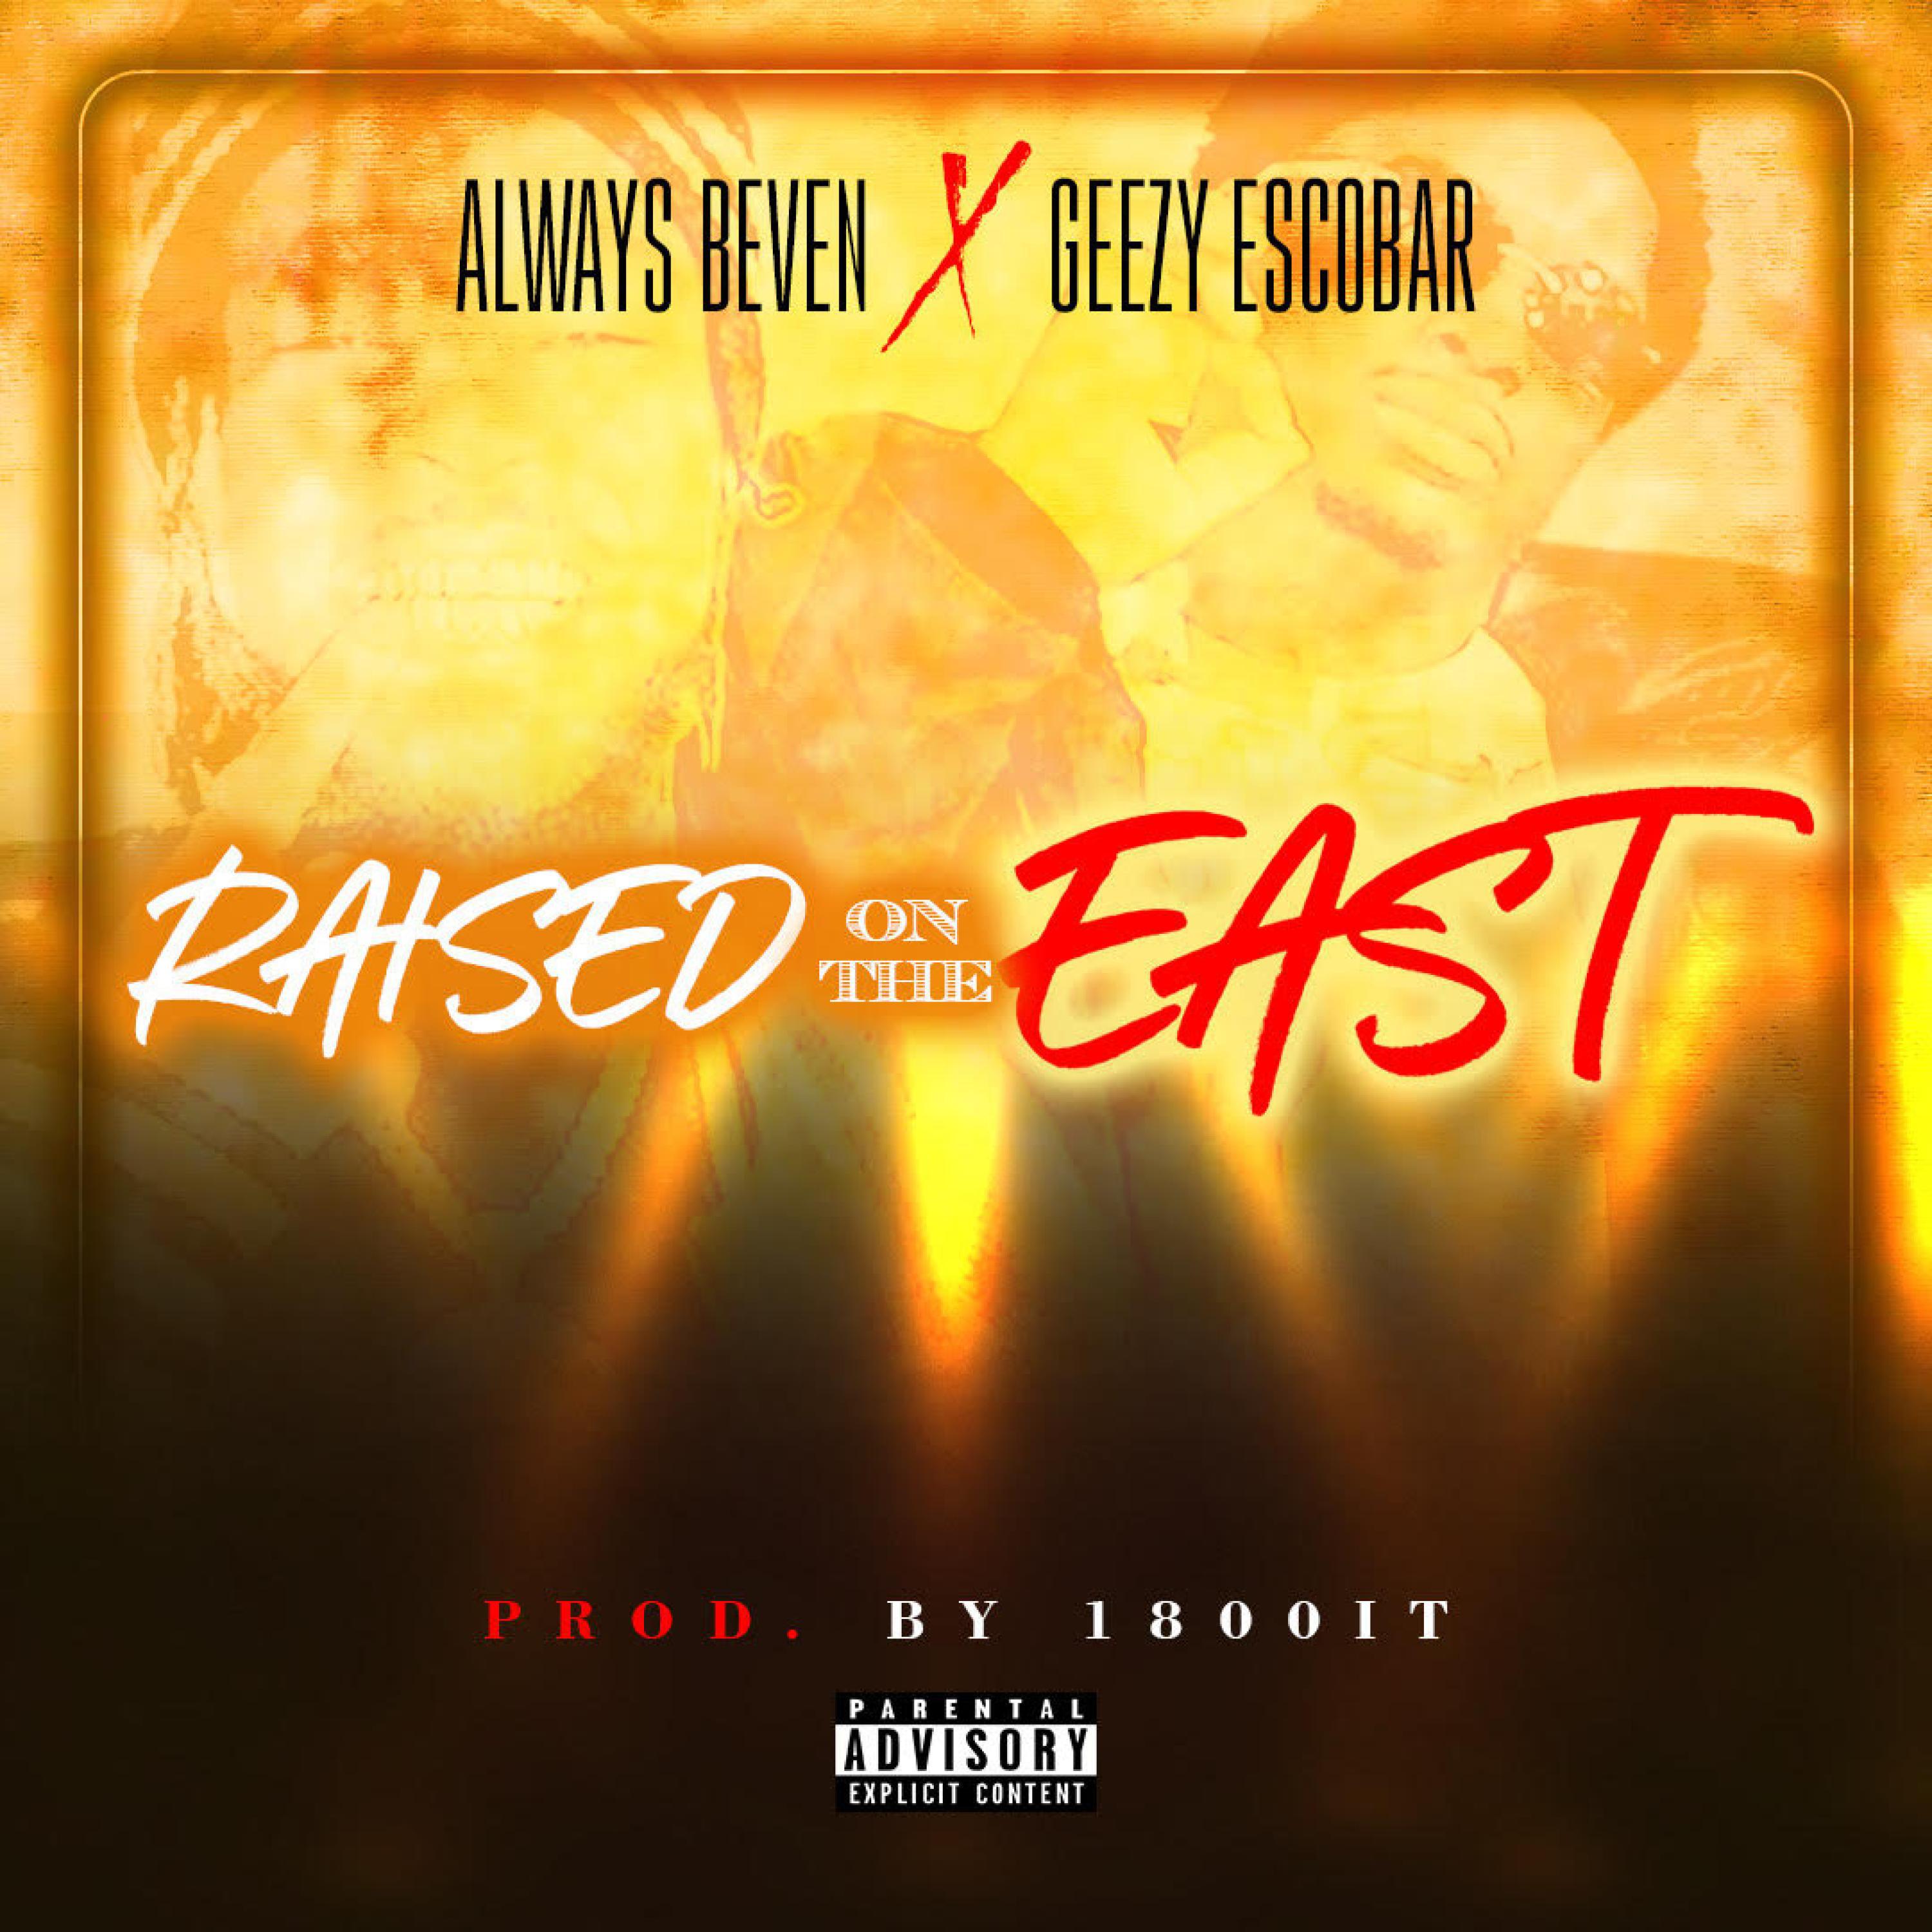 Always Beven - Raised On The East (feat. Geezy Escobar)